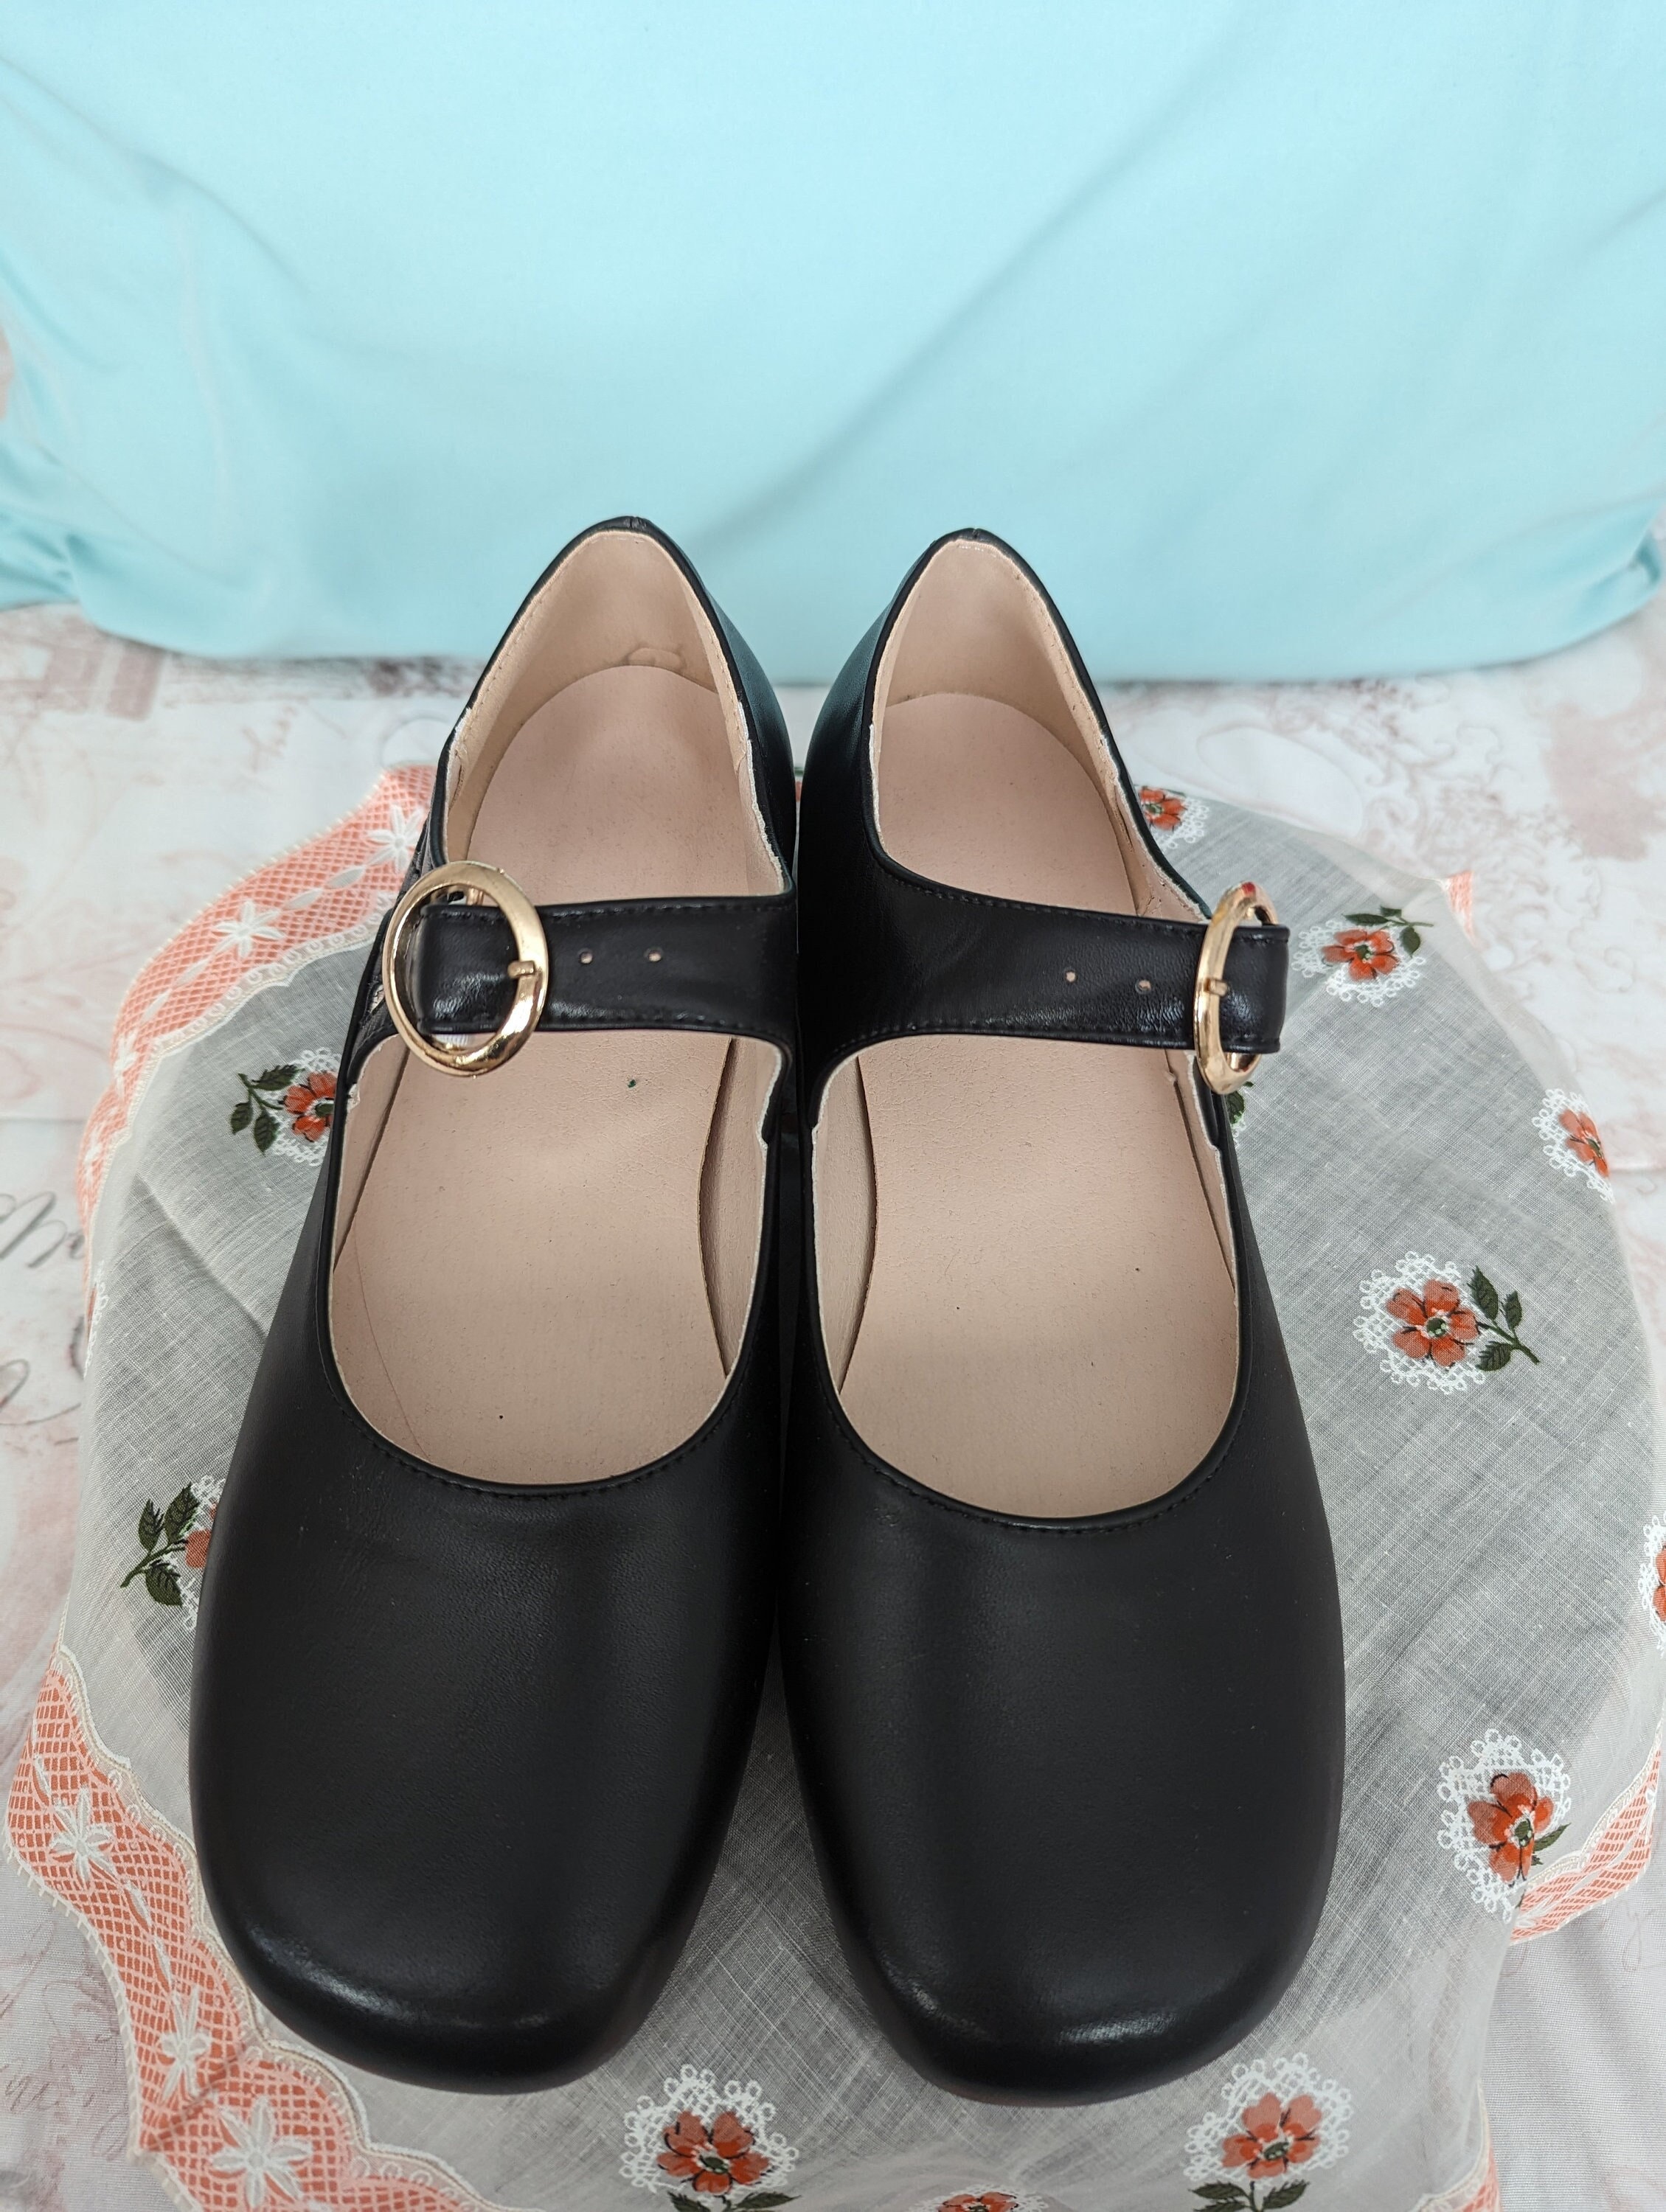 Women's Retro Leather Soft Sole Shoes. at Rs 5100.00/pair